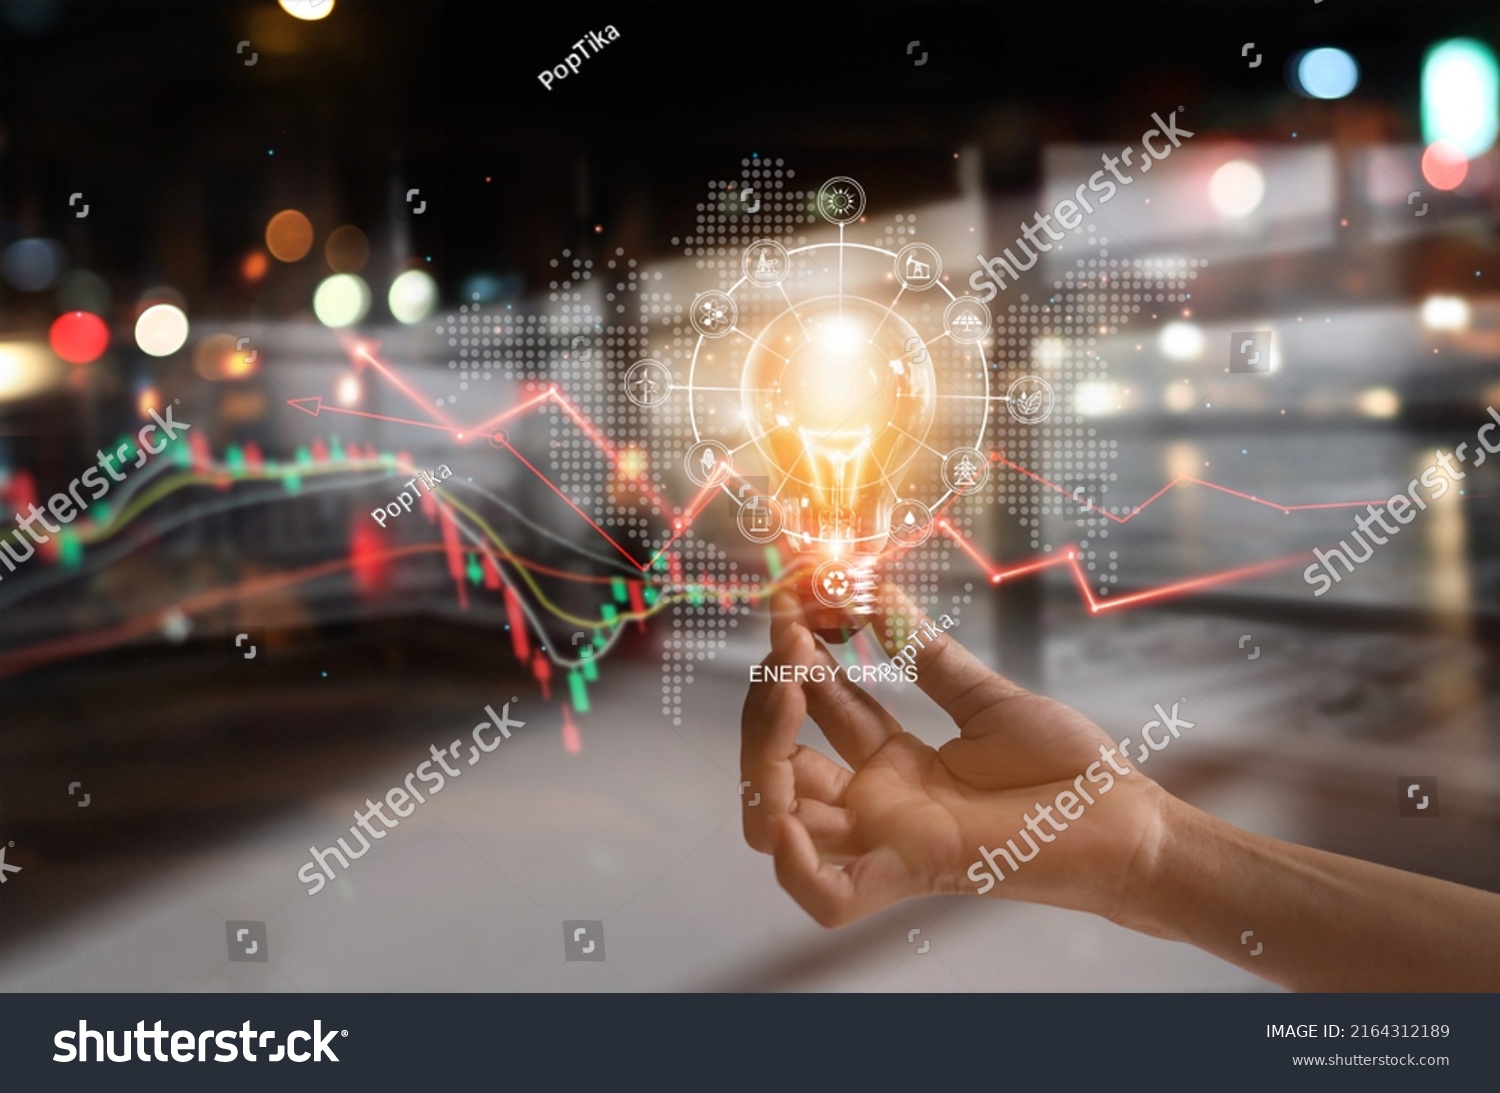 Energy crisis, Hand hold light bulb with energy resources icon and rising data chart representing electricity crisis, Economy   and alternative energy, Sustainability. Ecological friendly.  #2164312189